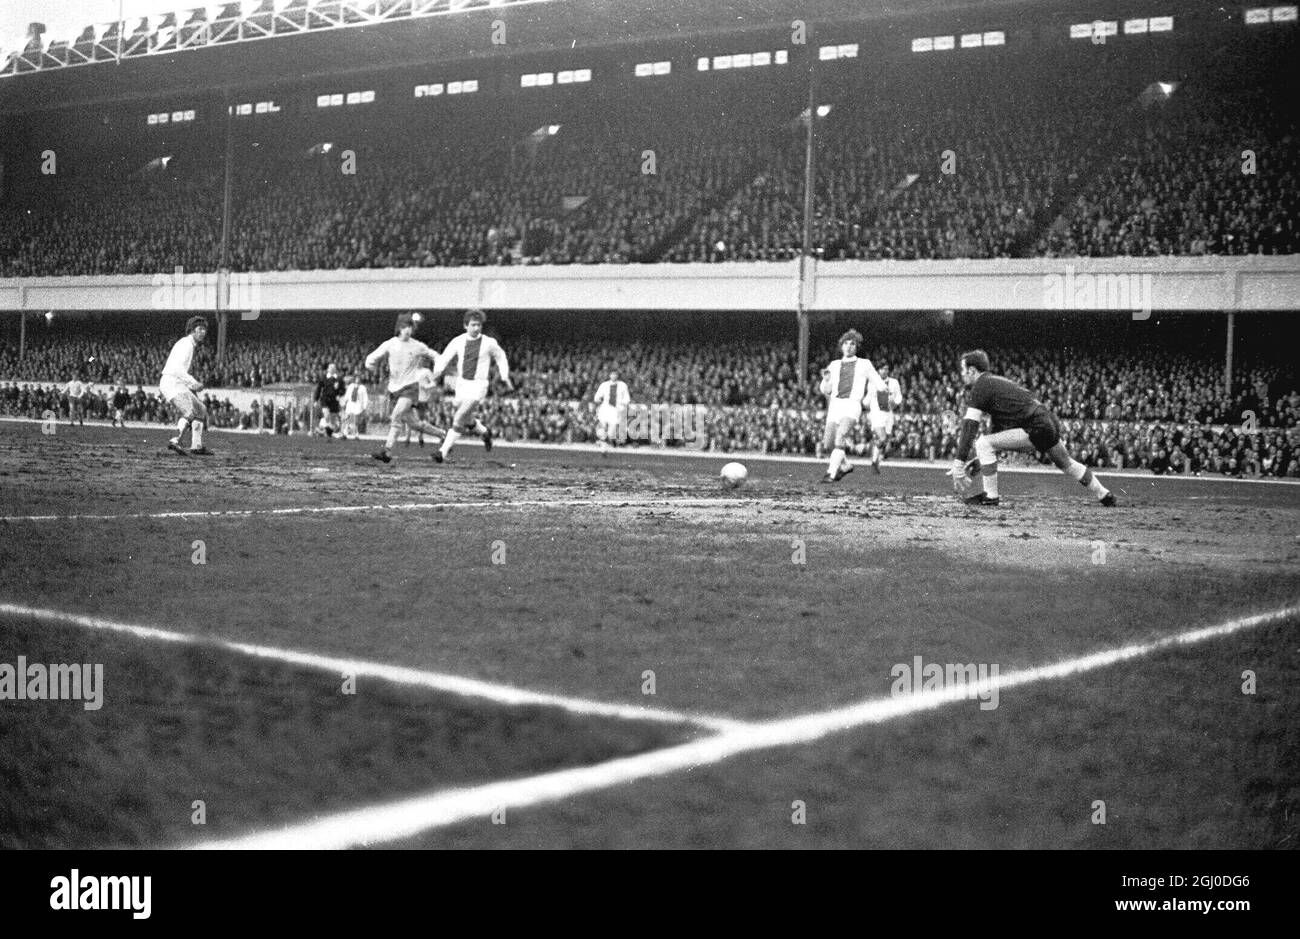 European Fairs Cup Semi-Final 1st Leg. Arsenal V Ajax Hulshoff (Ajax), (No.4 Centre) heads the ball clear during the match at Highbury. On the left is George Graham (Arsenal) and on the right is Suurbier (Ajax). On extreme right is Vasovic (Ajax). London - 8th April 1970. Stock Photo